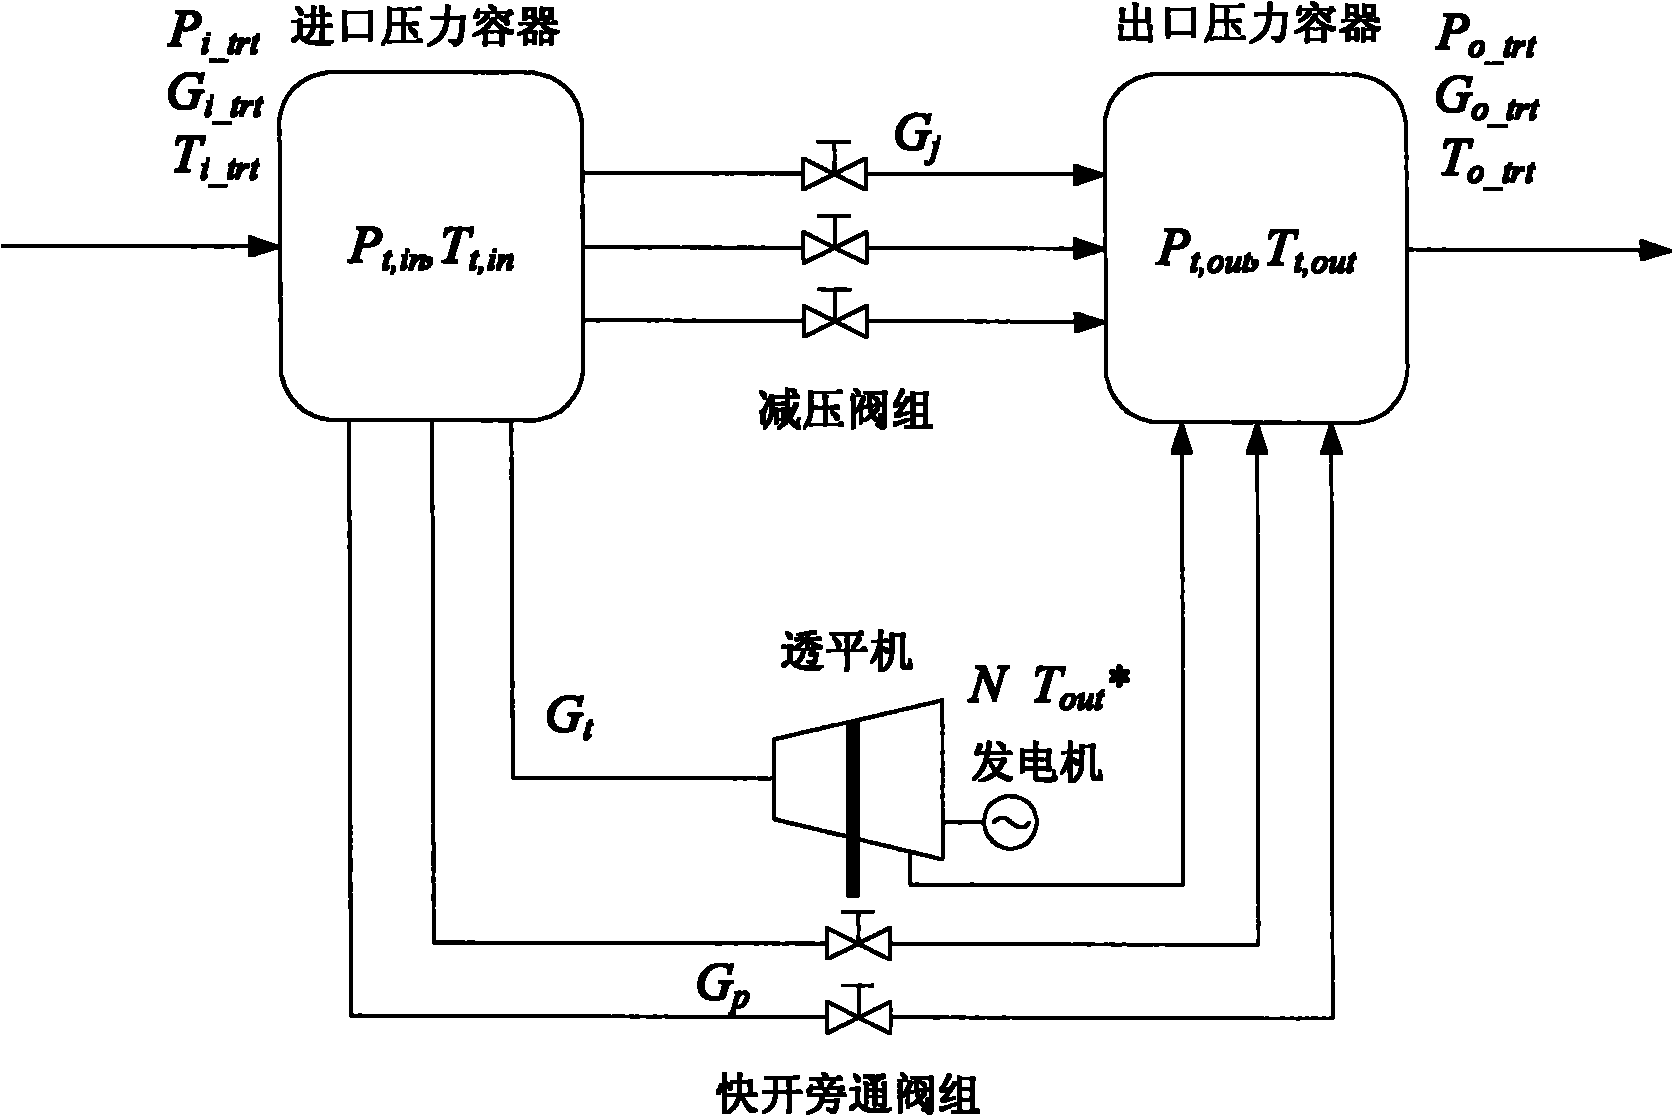 Distributed coordination control method of blast furnace system and pressure recovery turbine (TRT) device